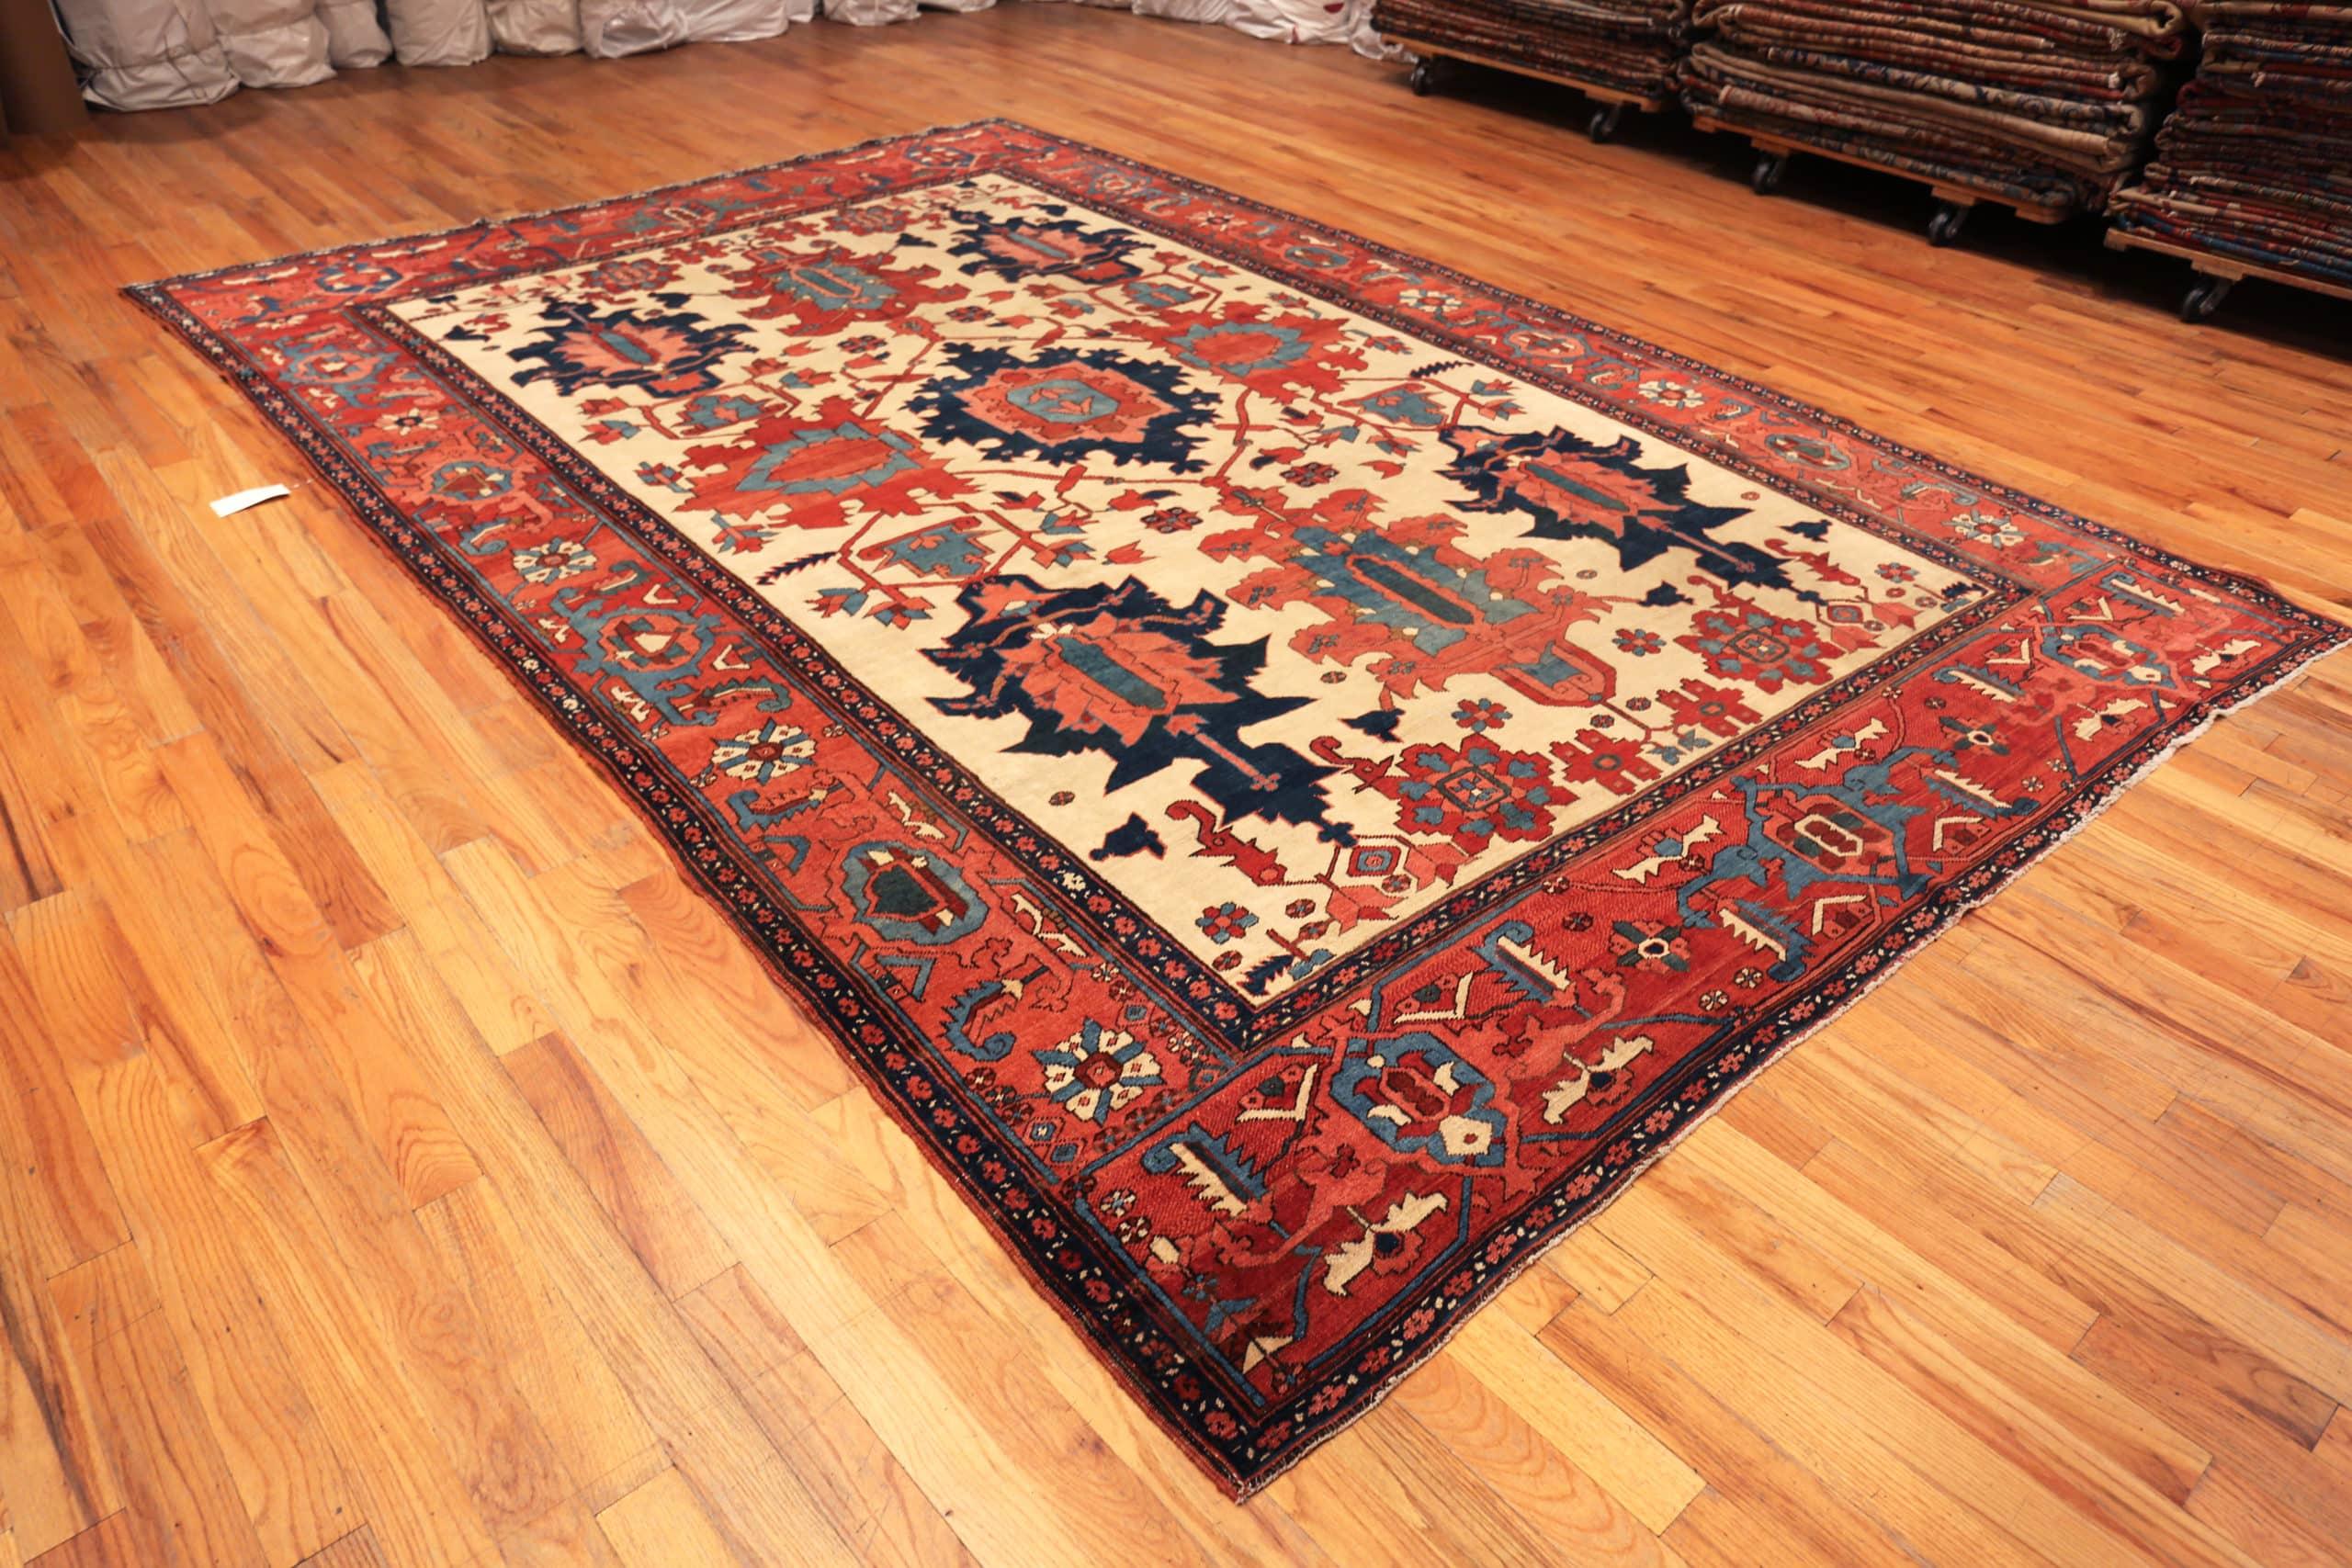 Nazmiyal Collection Antique Persian Heriz Area Rug, Country of origin: Persia, Circa date: 1900. Size: 9 ft 2 in x 13 ft 4 in (2.79 m x 4.06 m)

